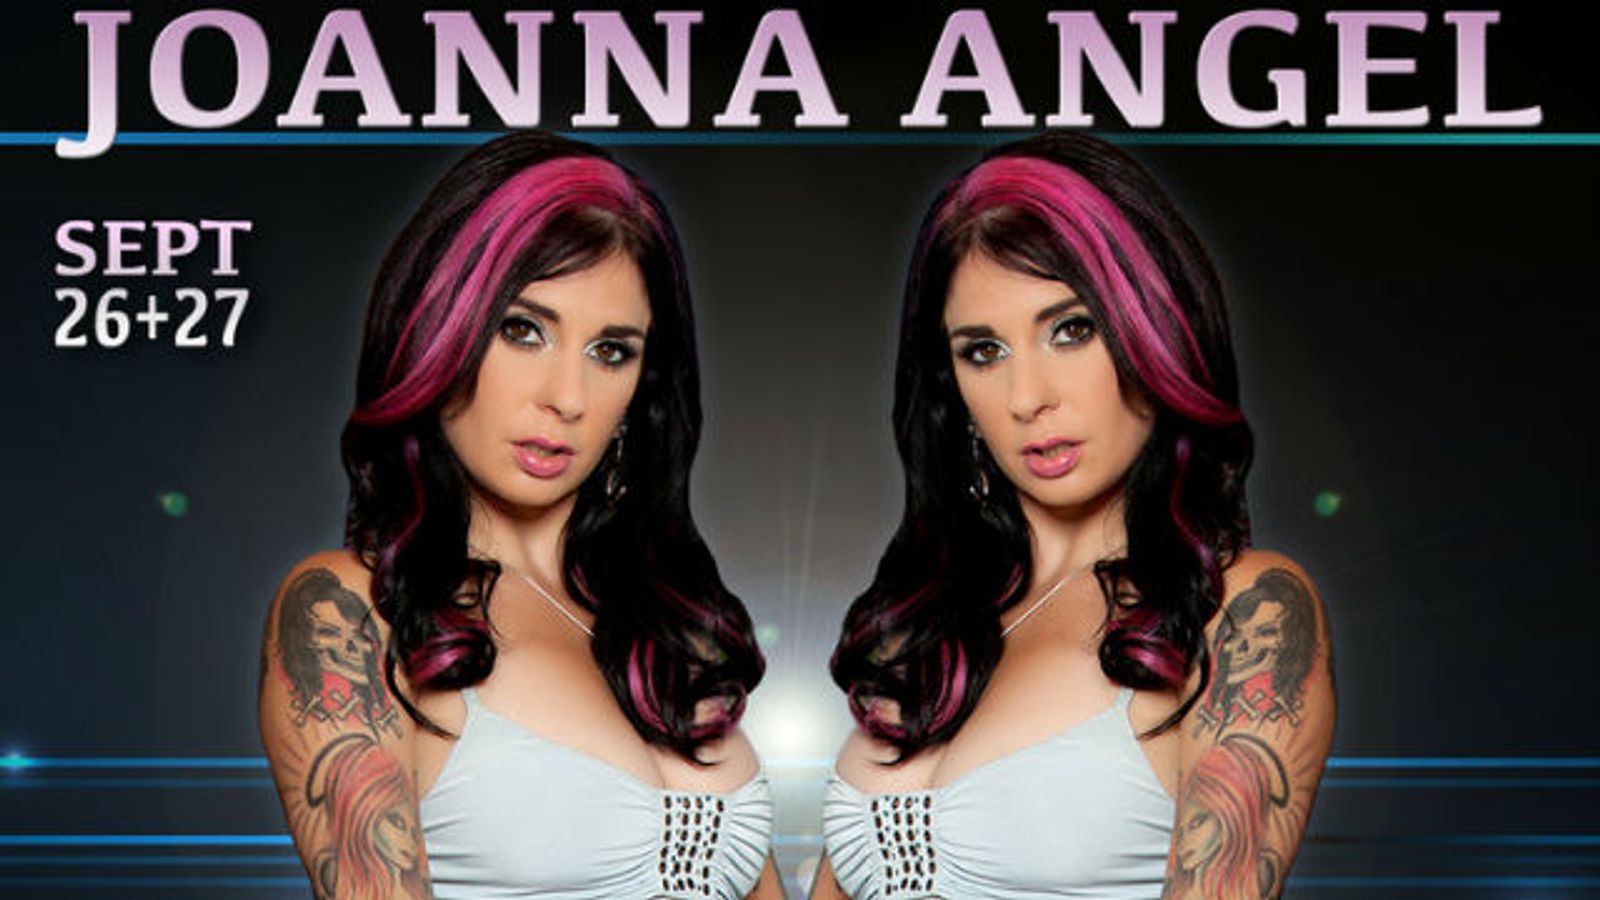 Joanna Angel Heads to Pennsylvania for Two Nights at Double Visions